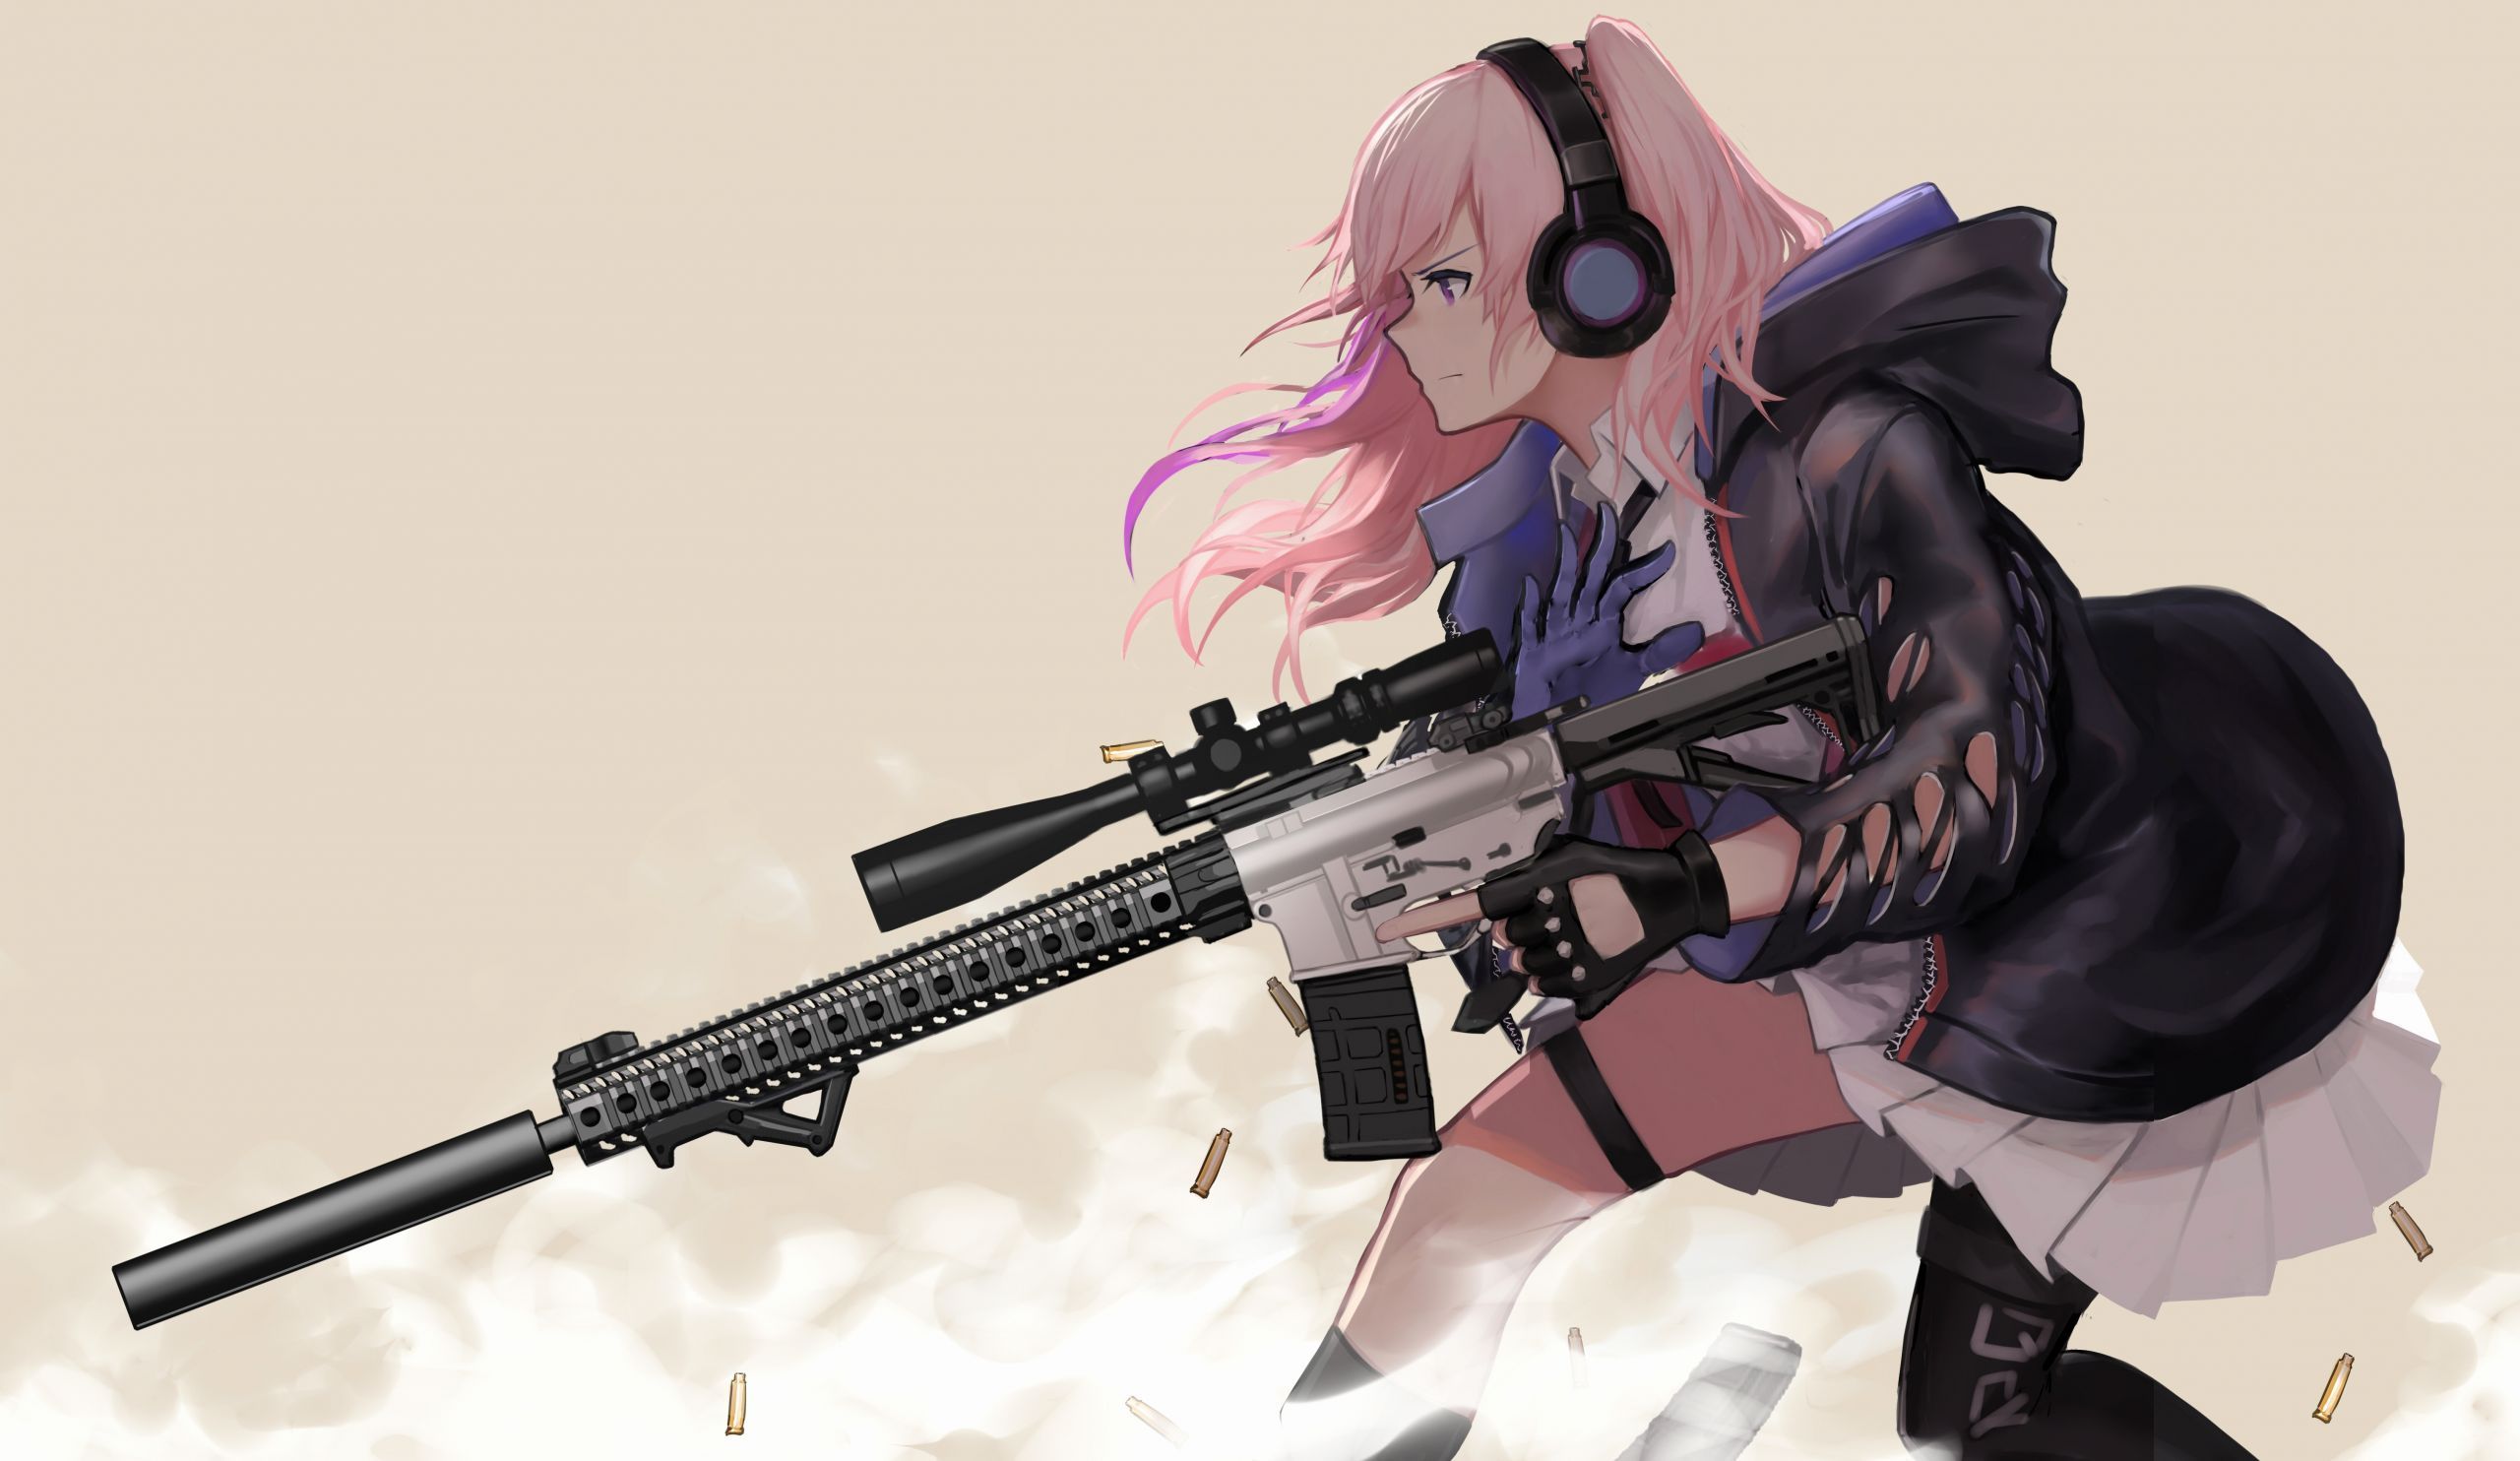 Unique Anime Girl with Sniper Rifle This Week